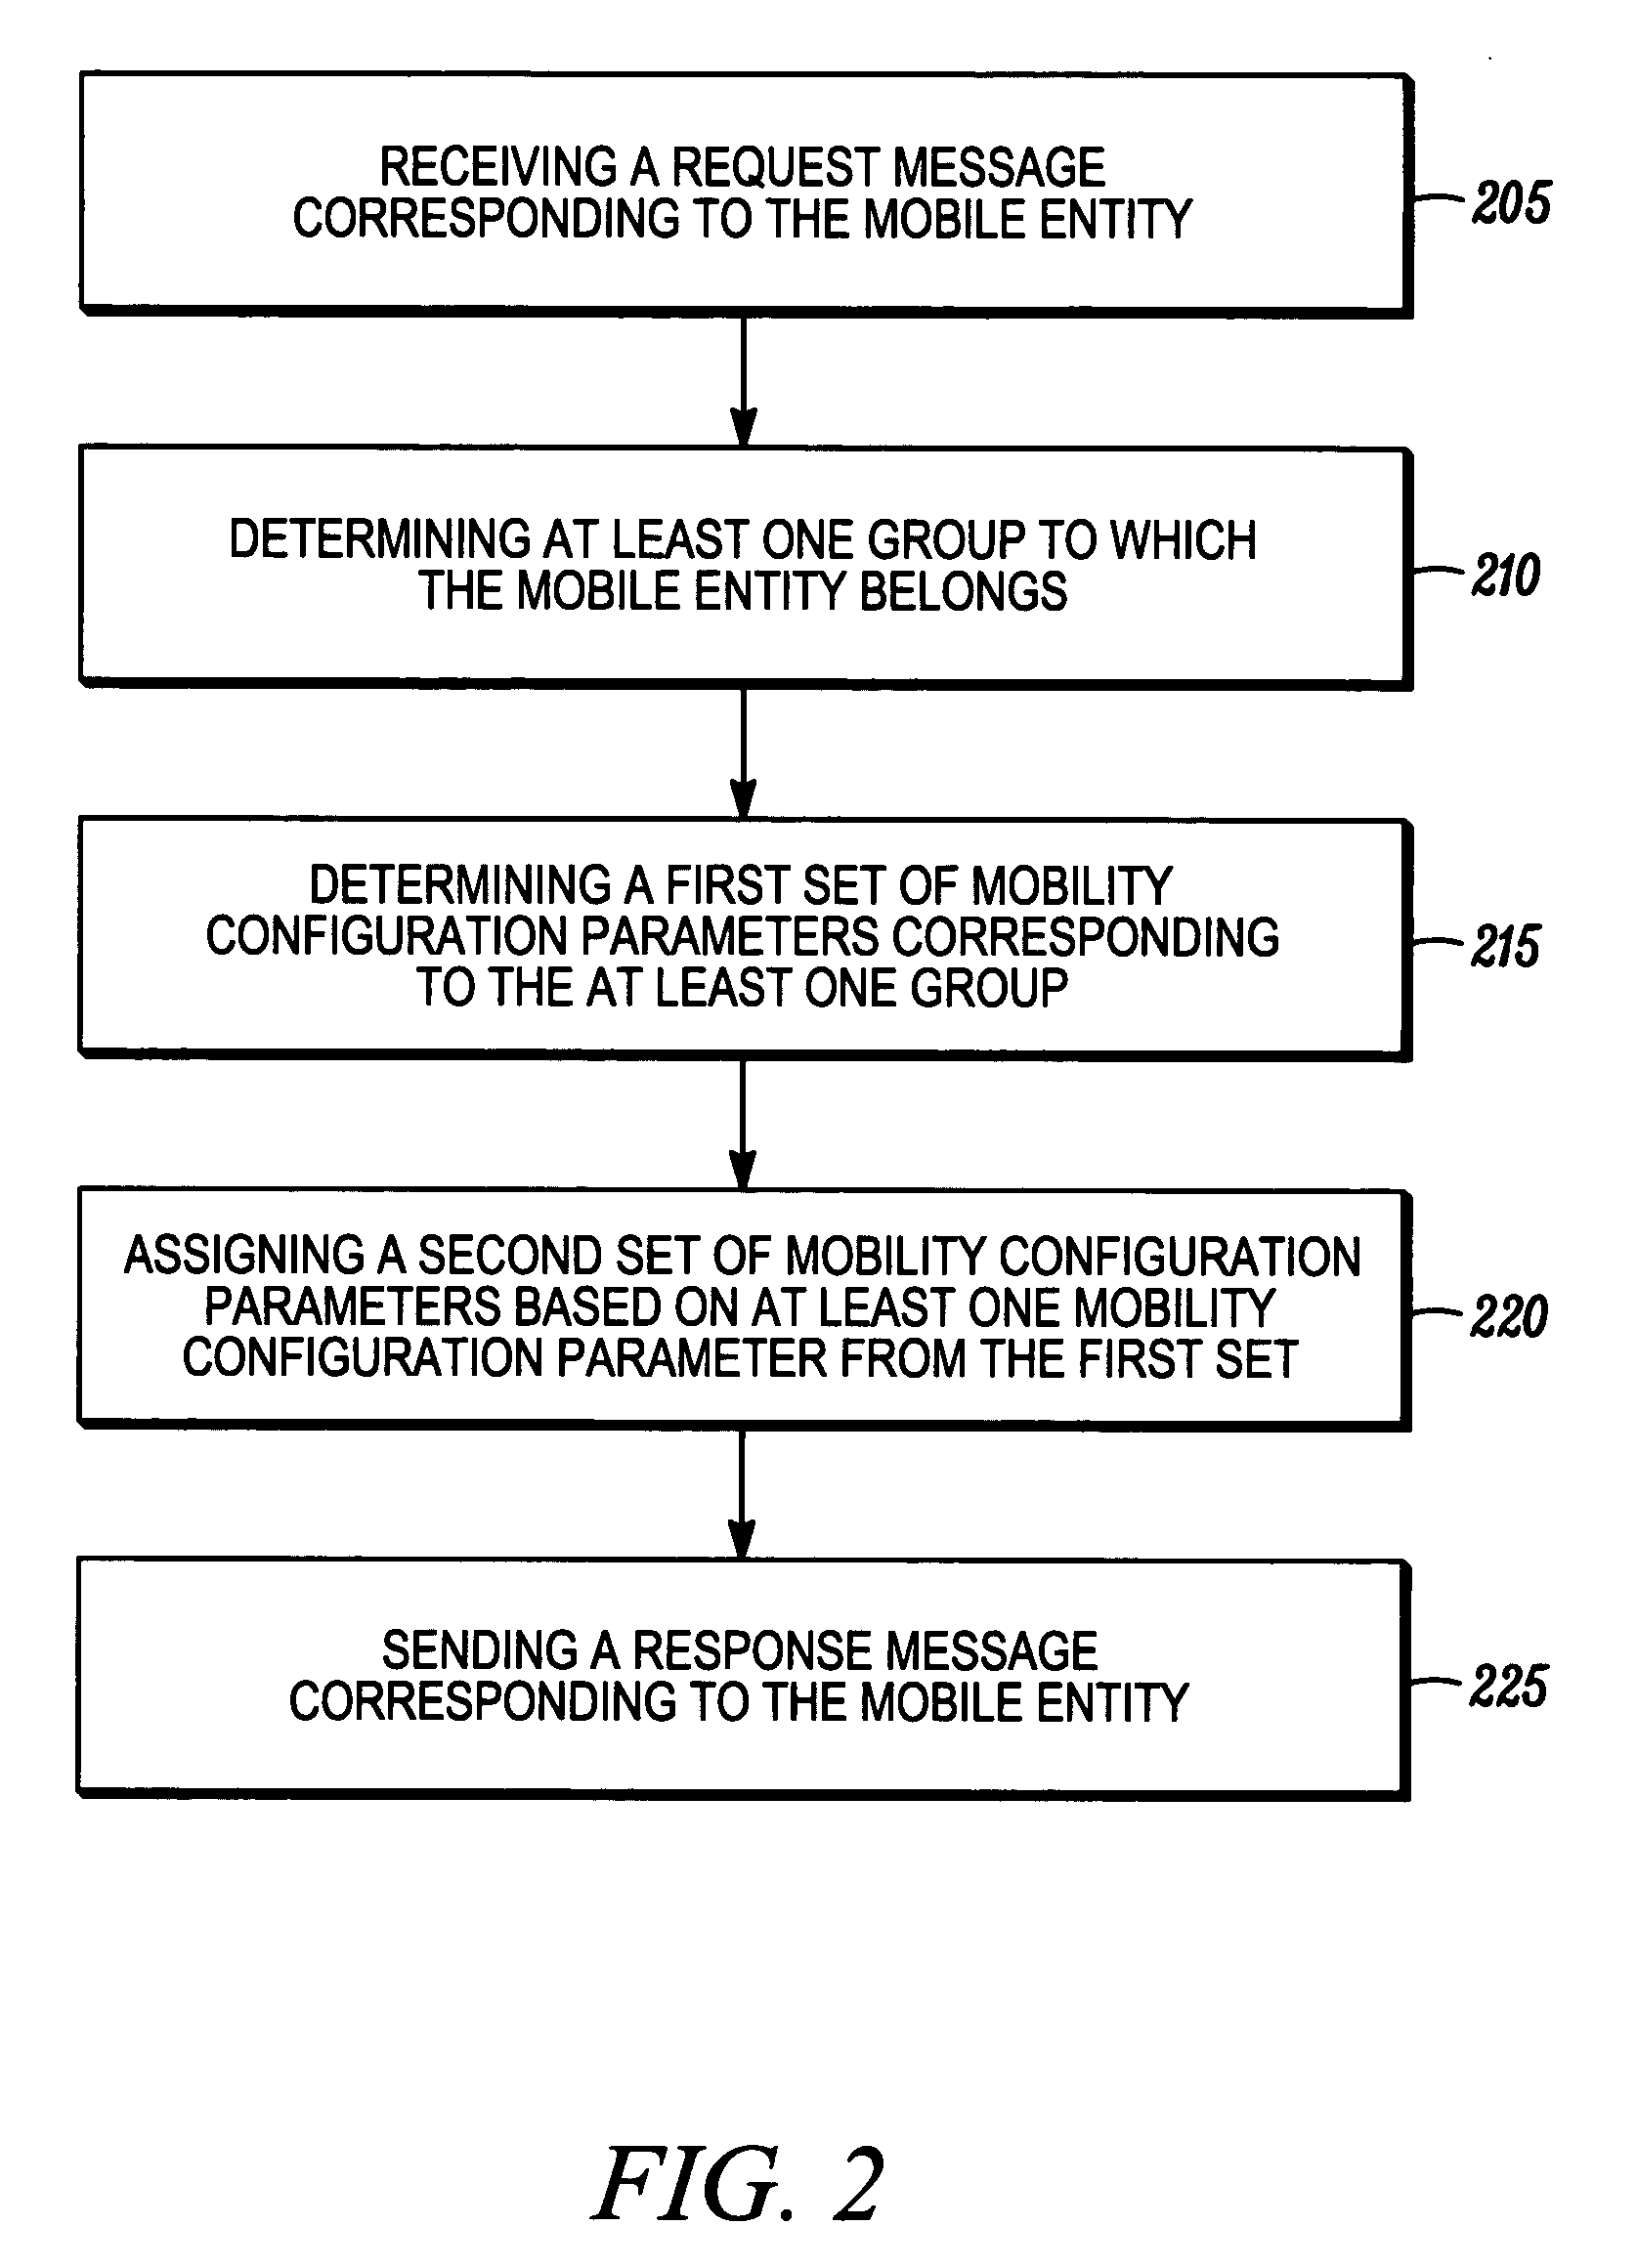 Method of dynamically assigning mobility configuration parameters for mobile entities